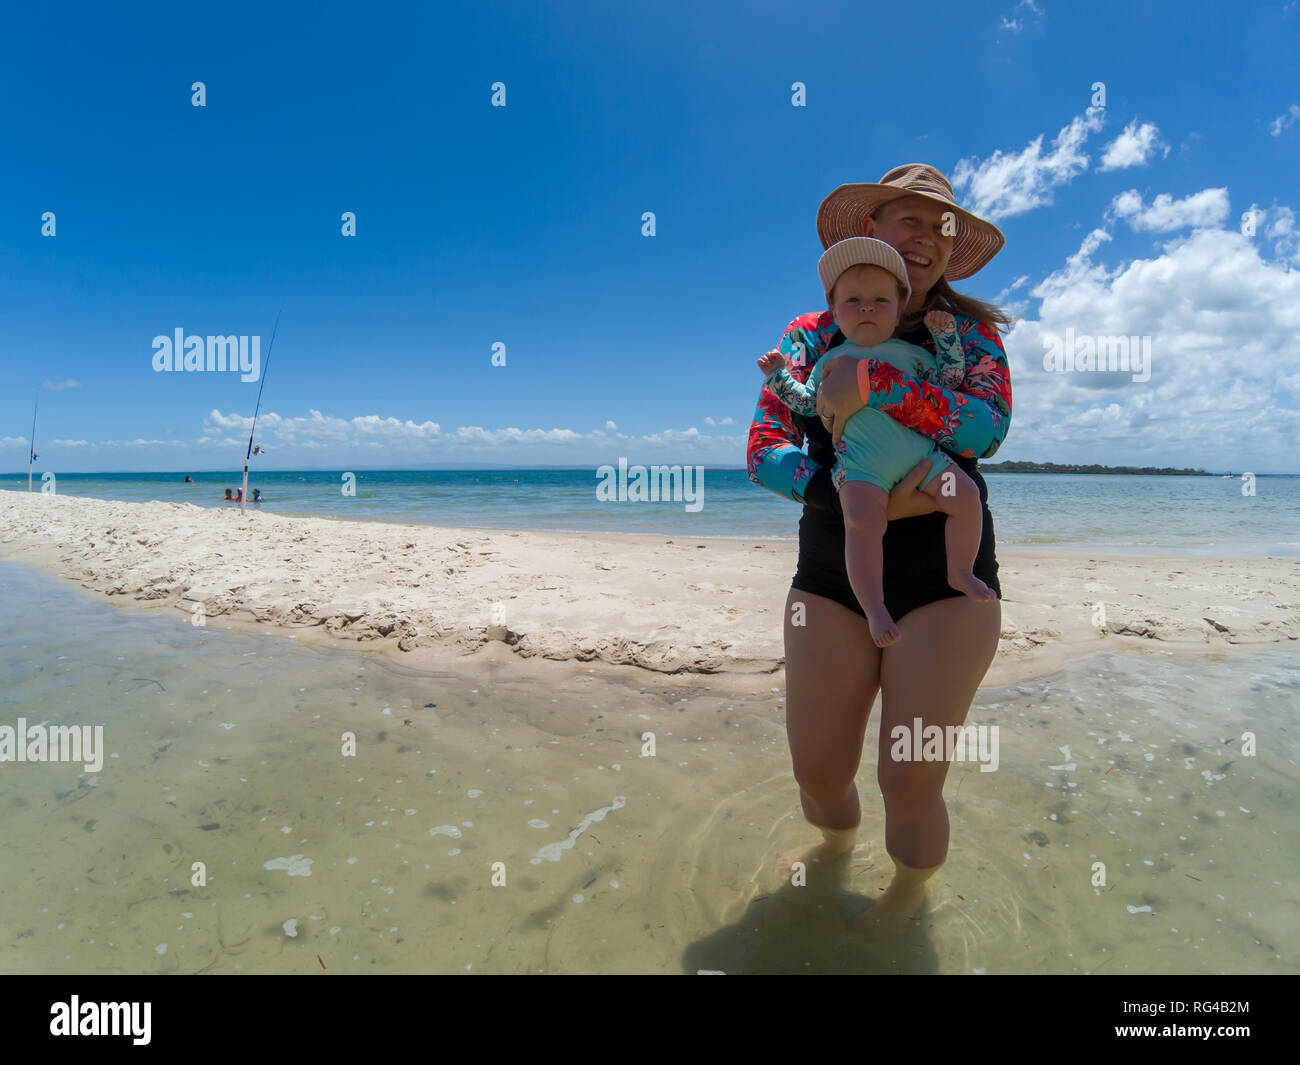 A blonde mum in her late thirties with baby playing at beach. Stock Photo